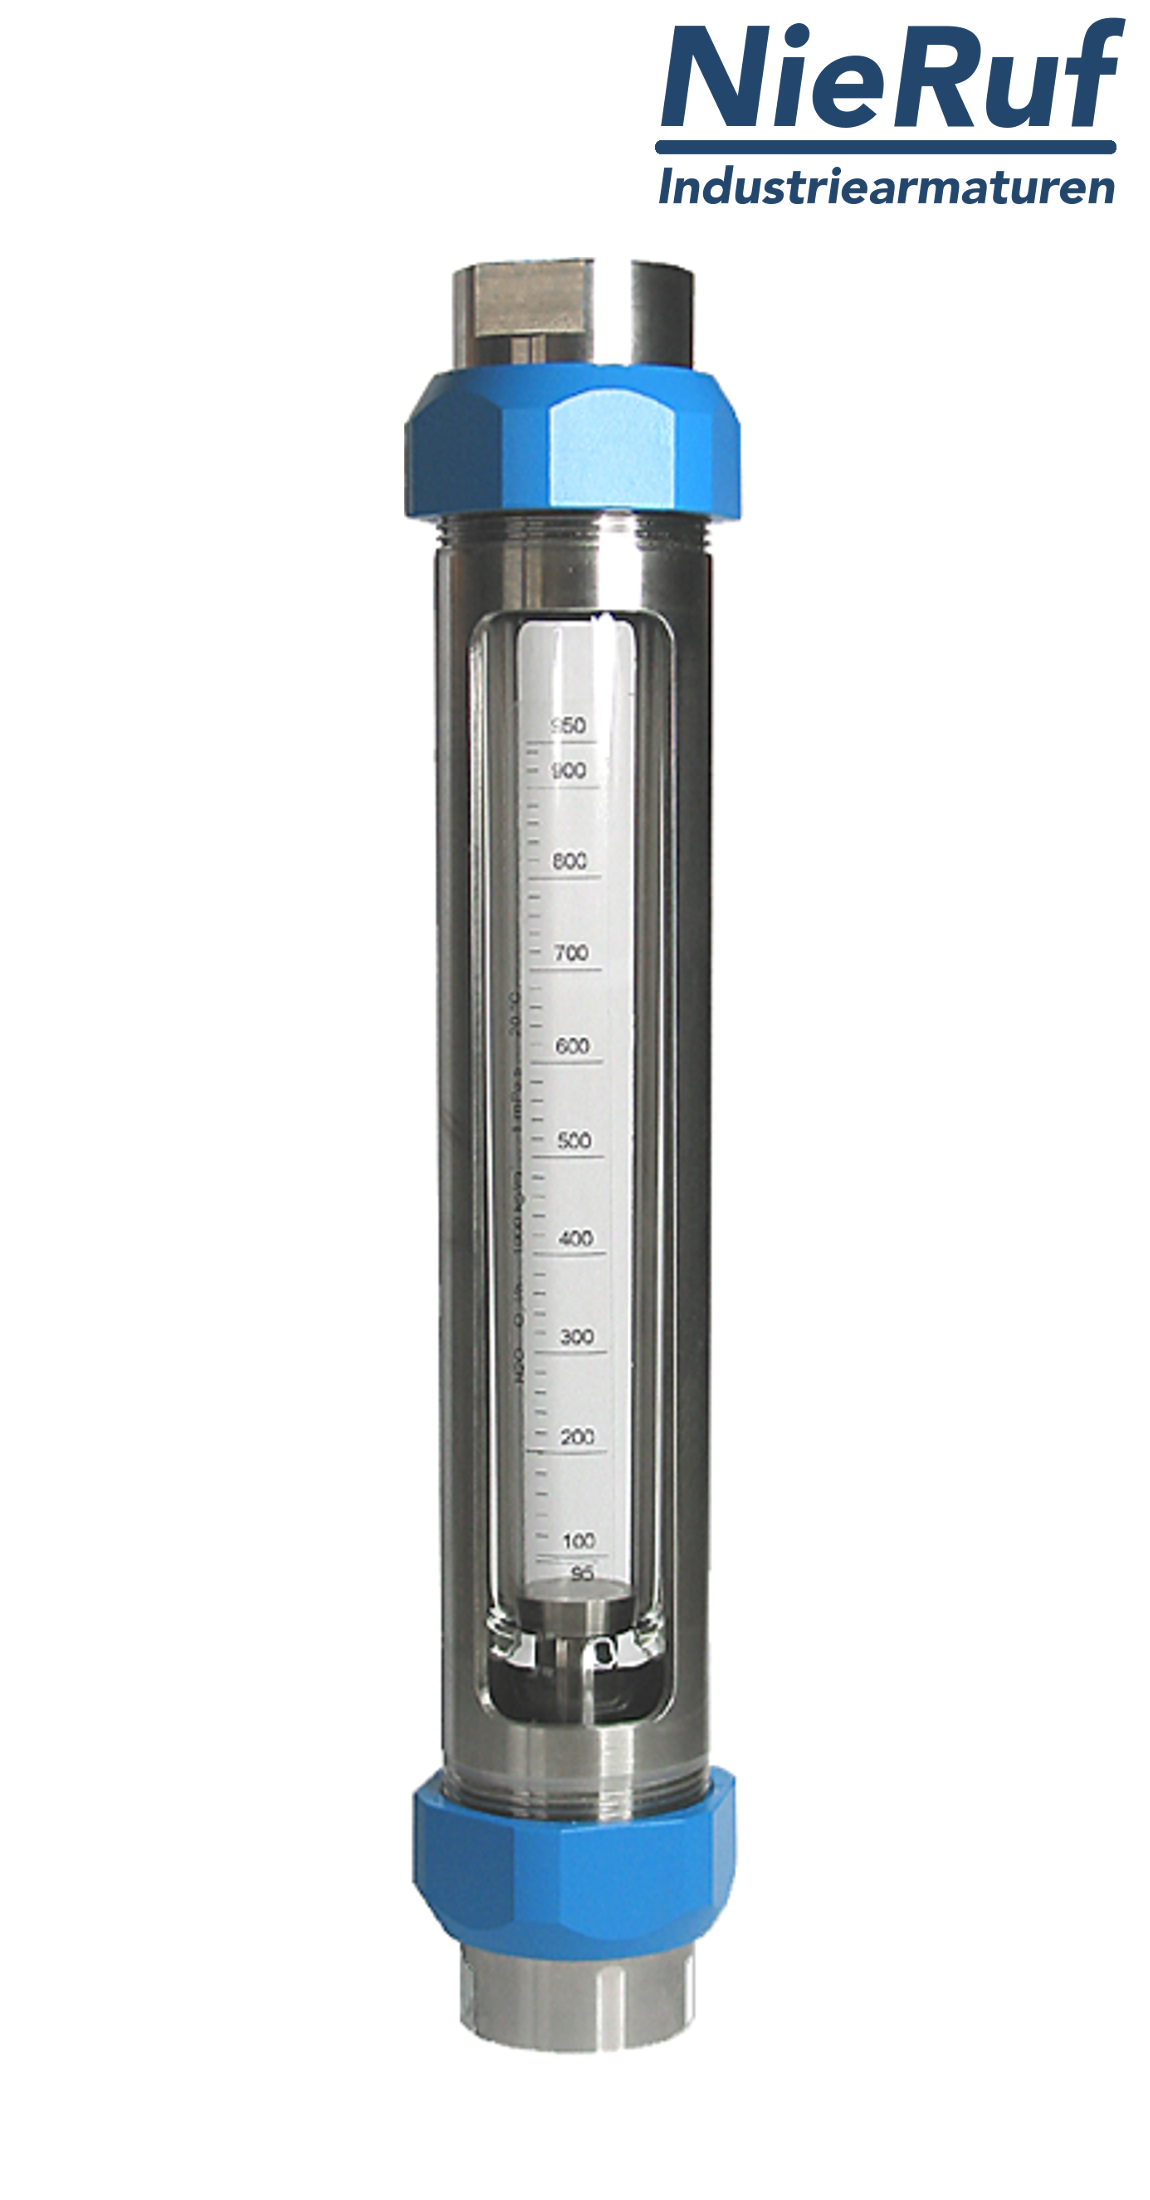 Variable area flowmeter stainless steel + borosilicate 1" Inch 100.0 - 1000 l/h water FKM